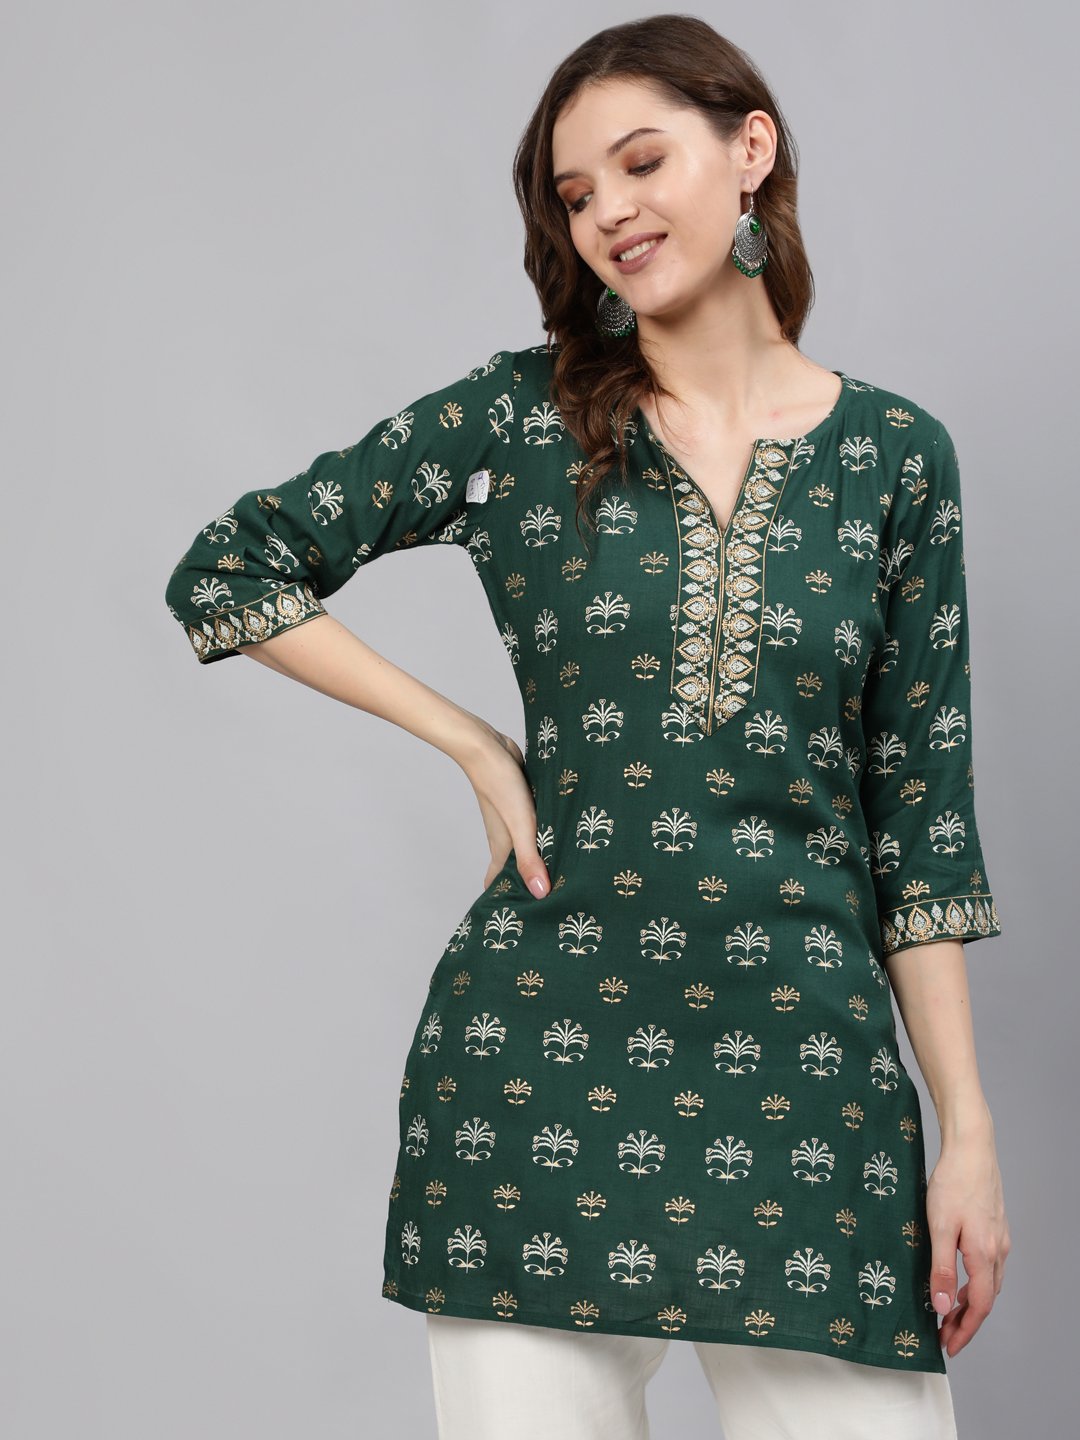 Women's Green & Gold Printed Tunic With Three Quarter Sleeves - Nayo Clothing